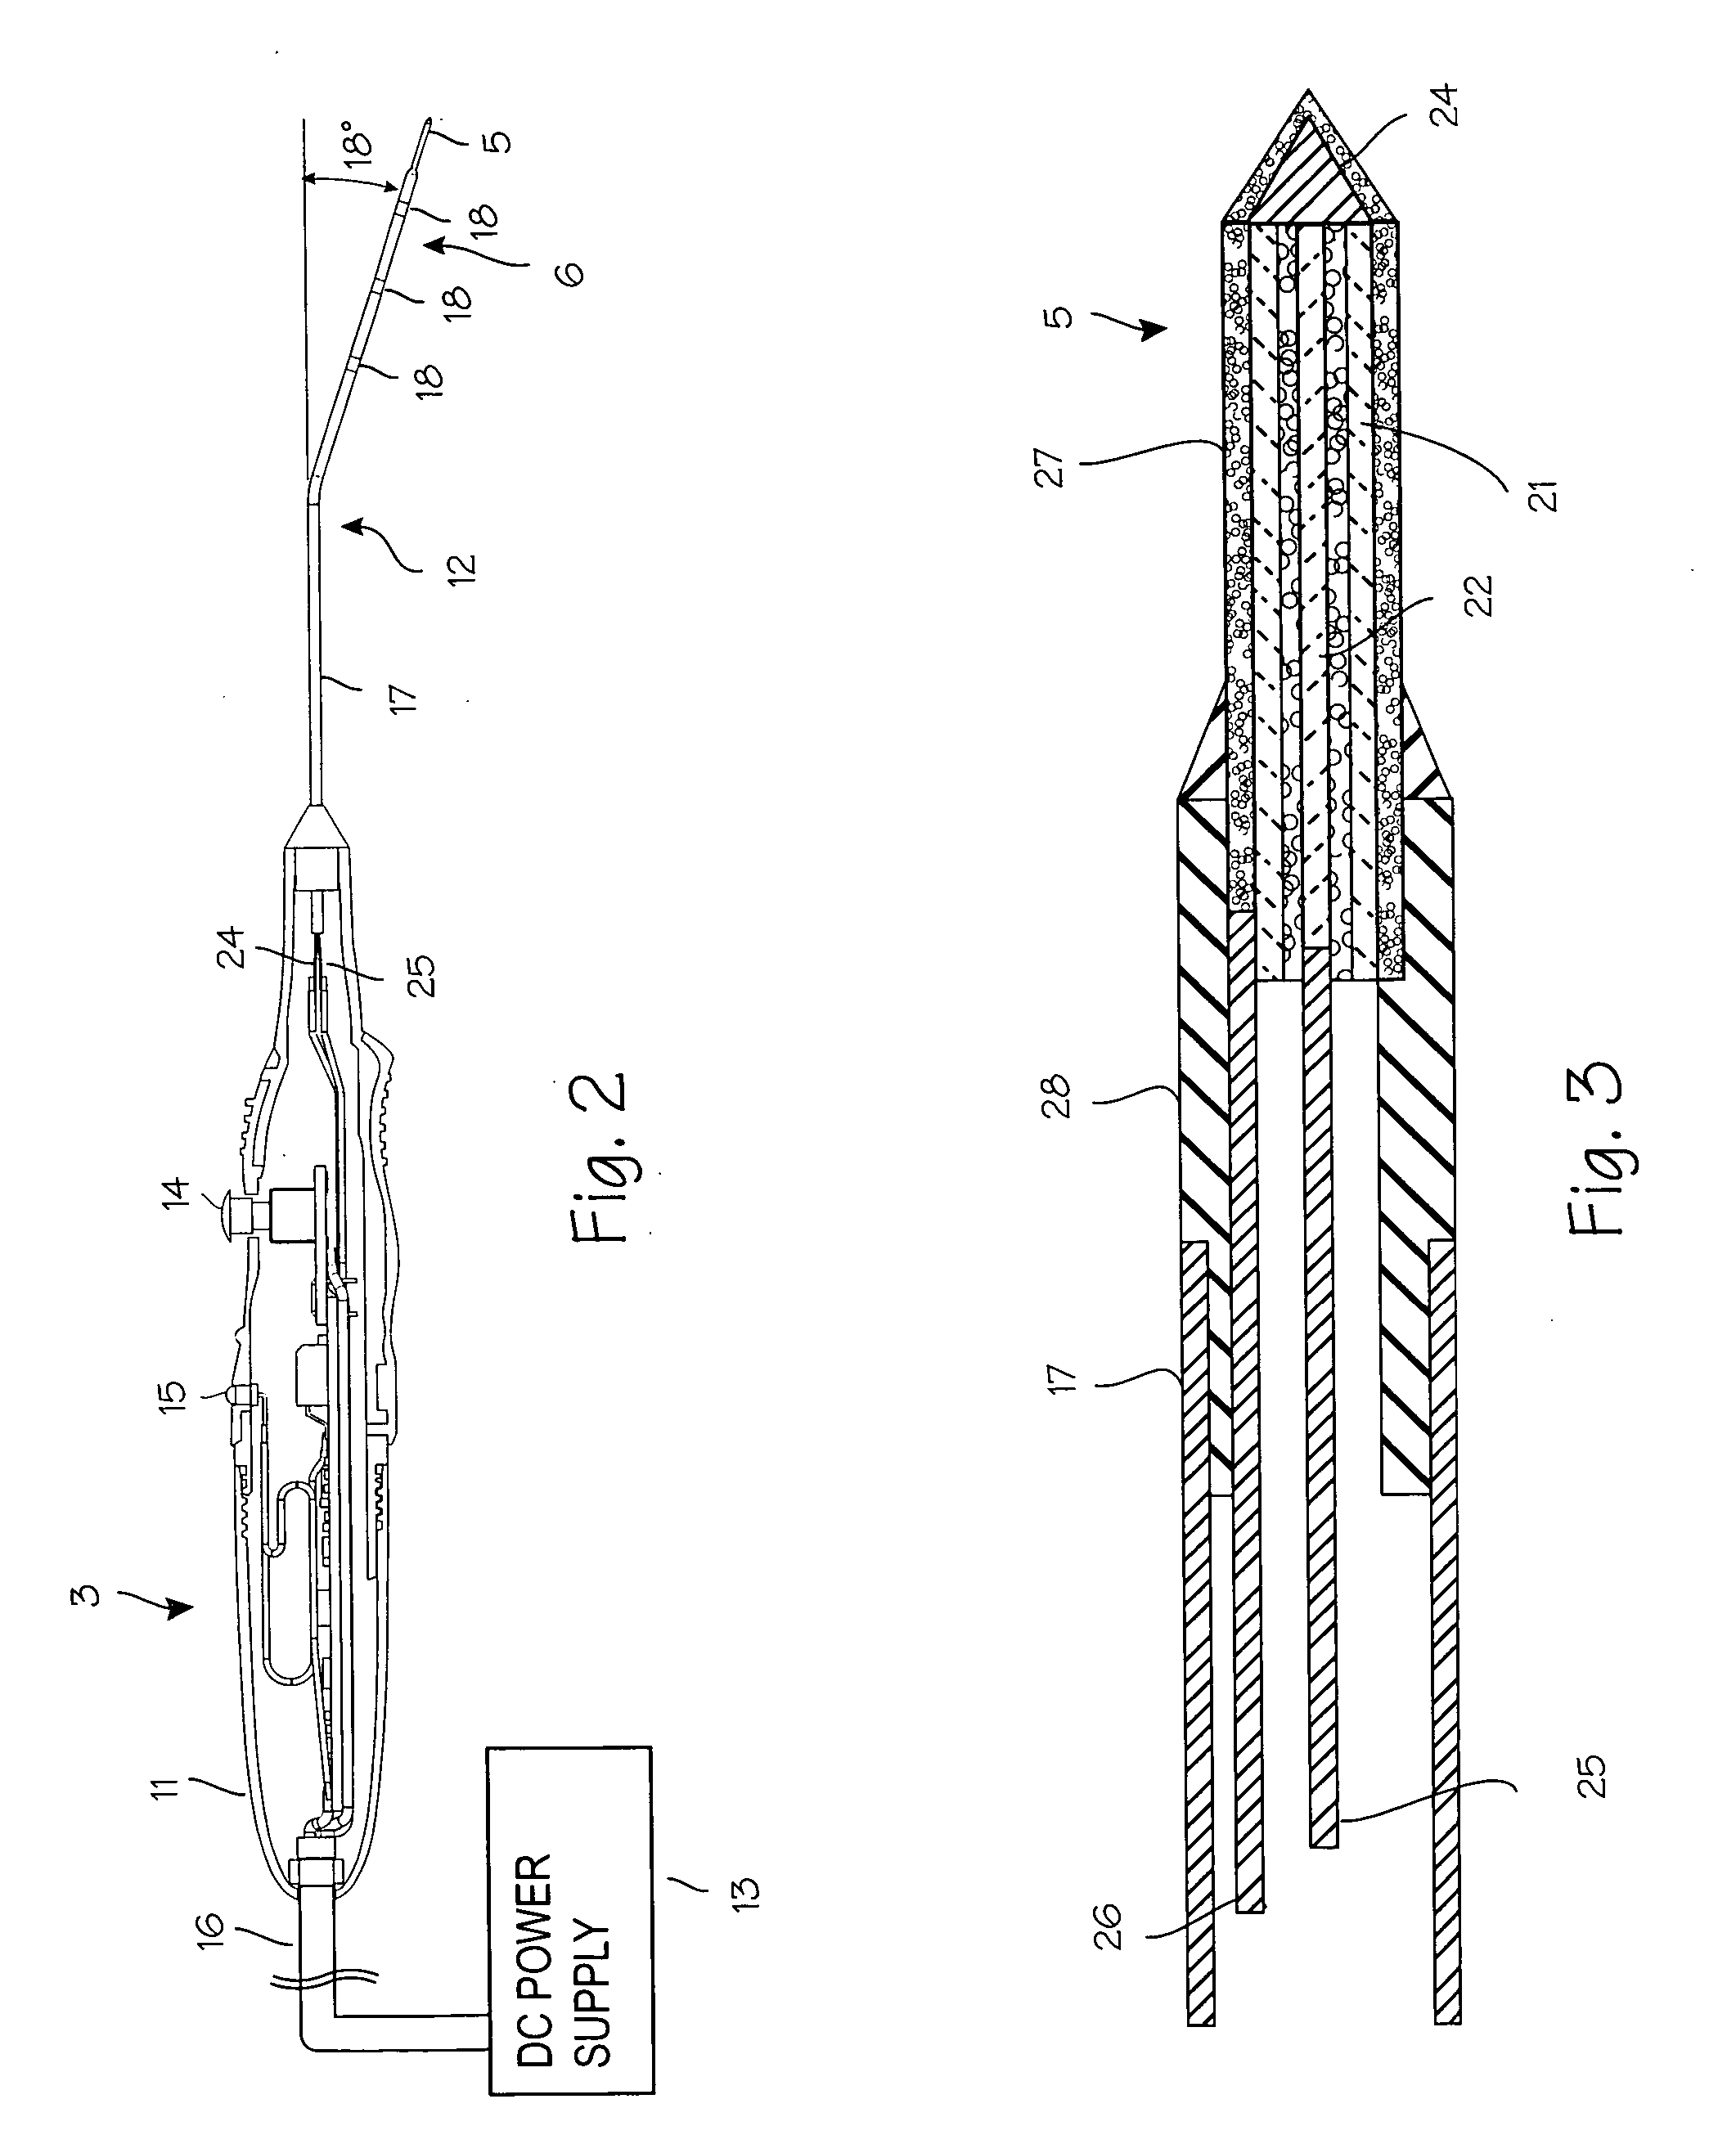 Resistive heating device and method for turbinate ablation